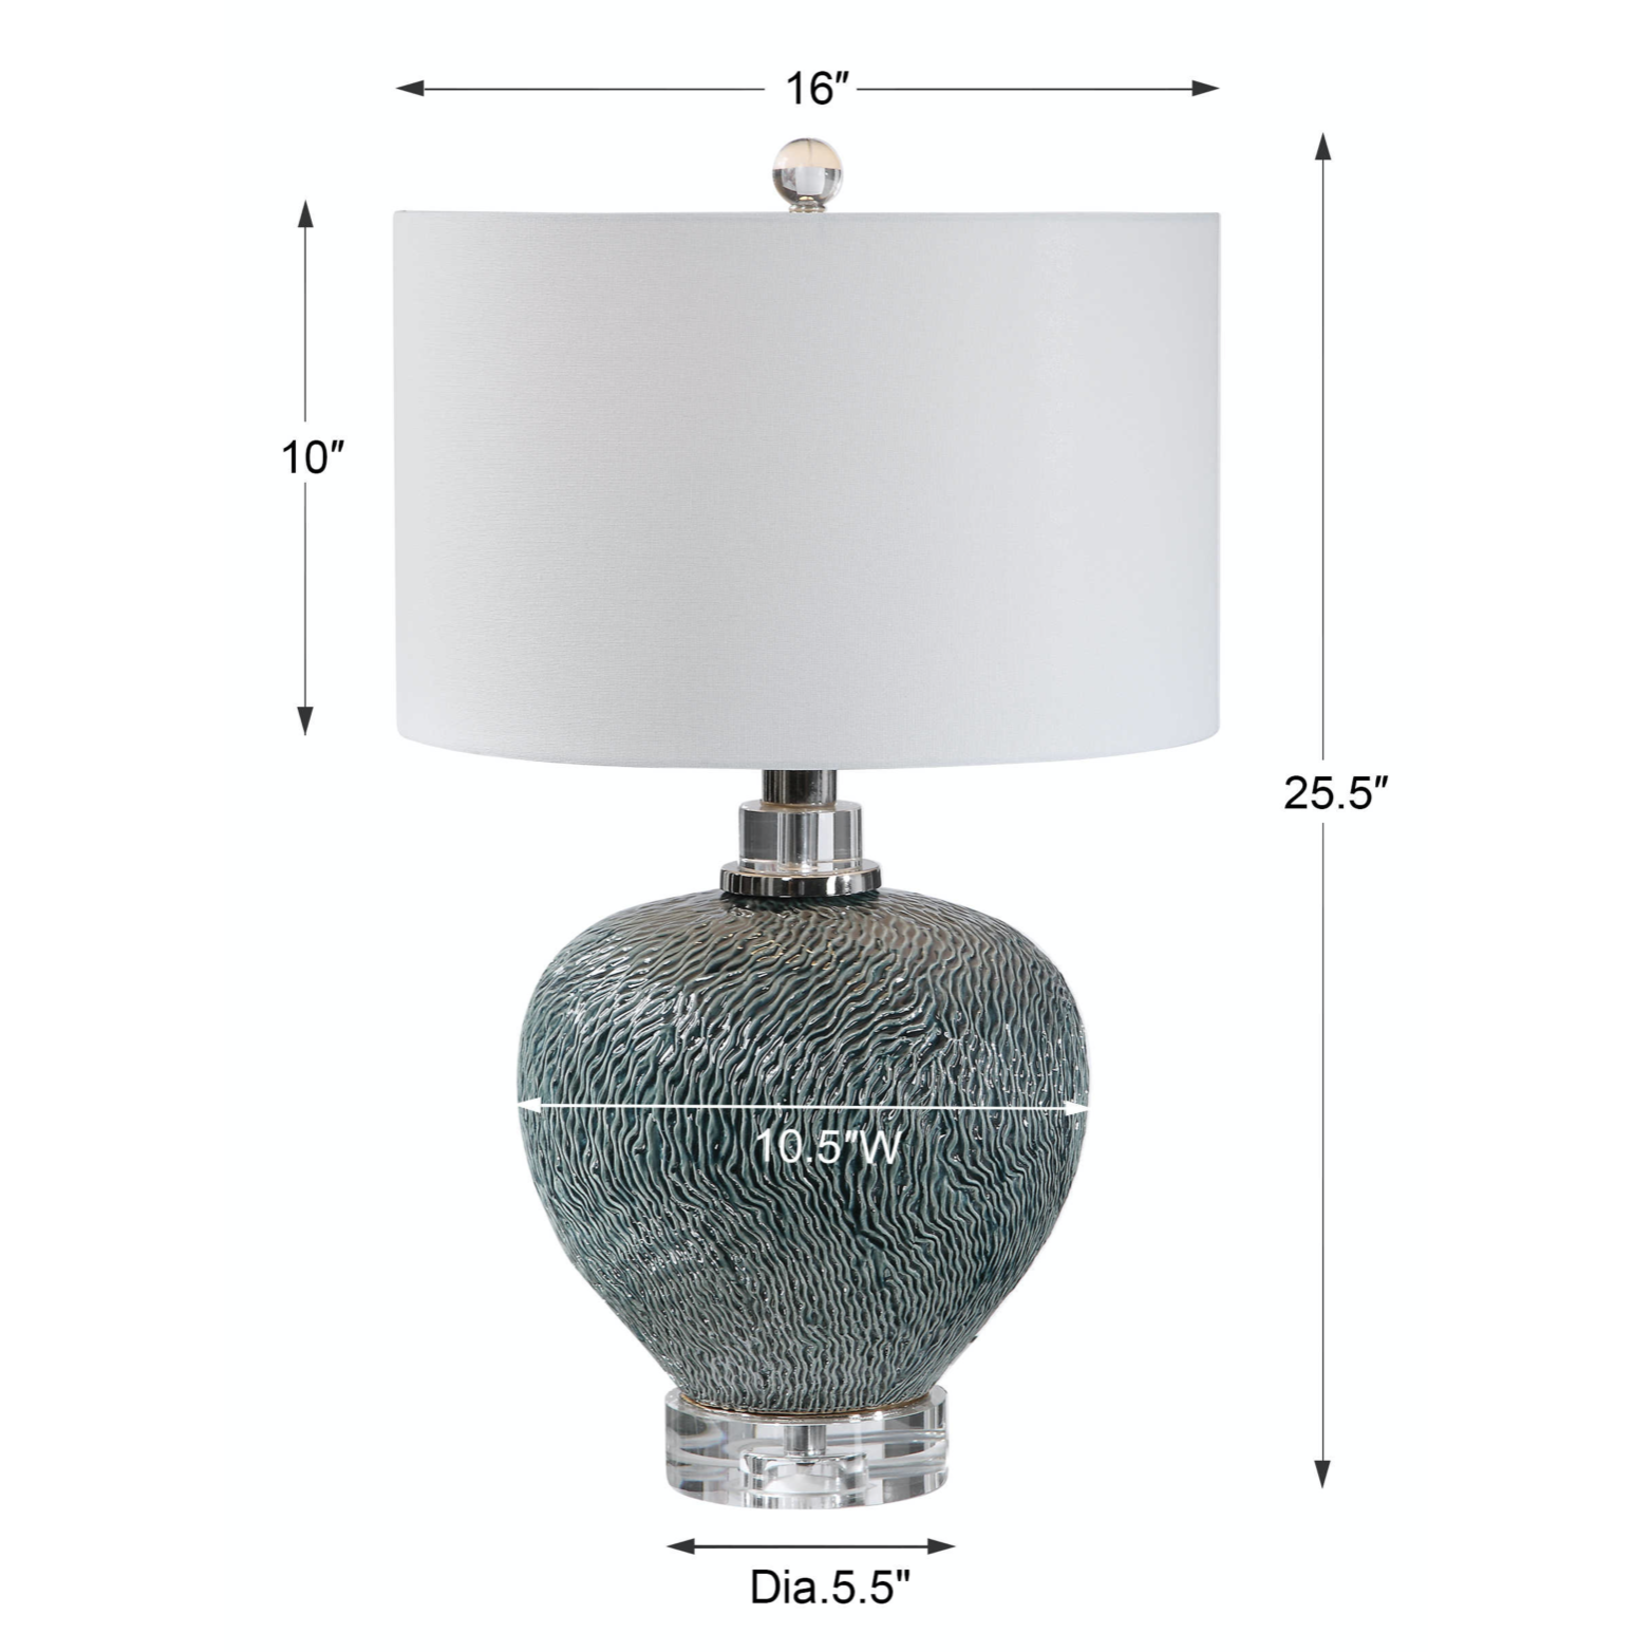 Outside The Box 26" Uttermost Almera Coral Inspired Table Lamp